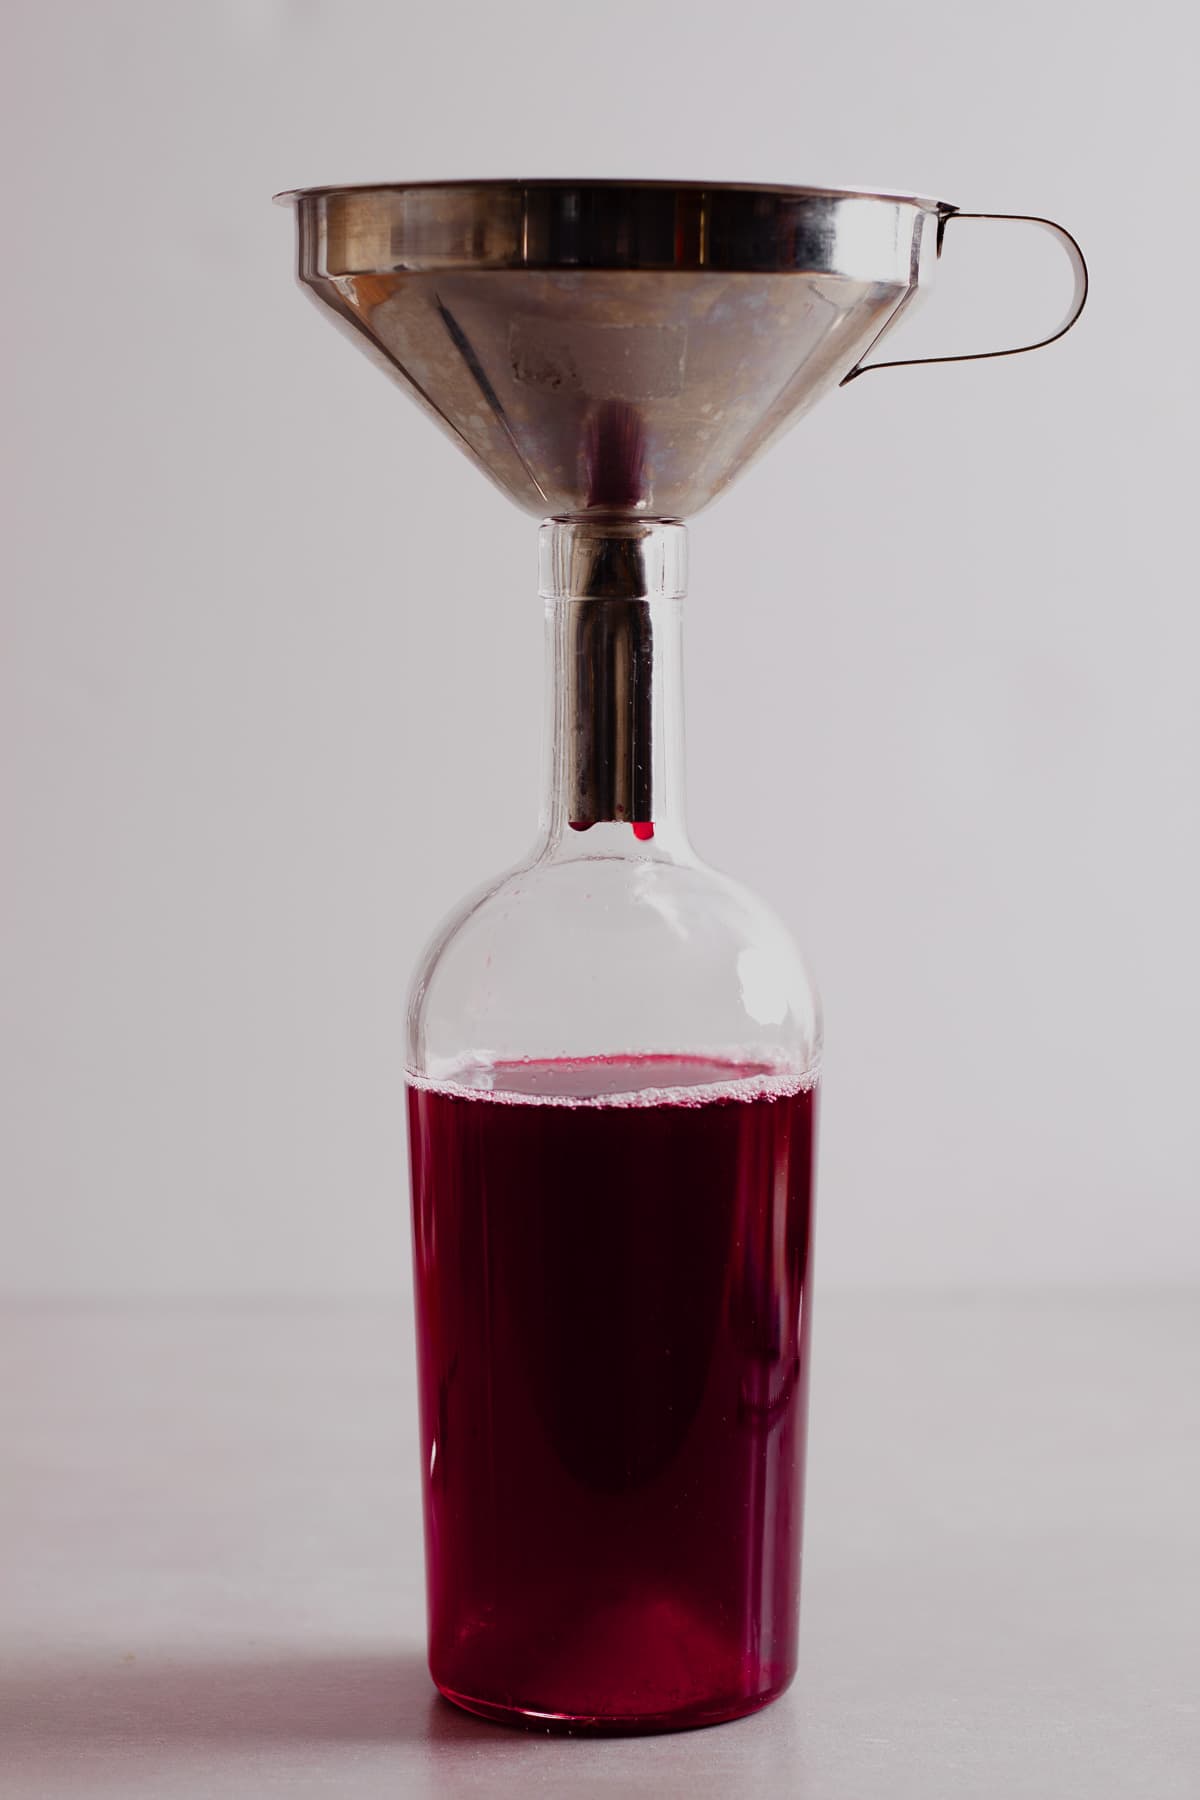 A funnel over a glass syrup jar filled with blackberry simple syrup.